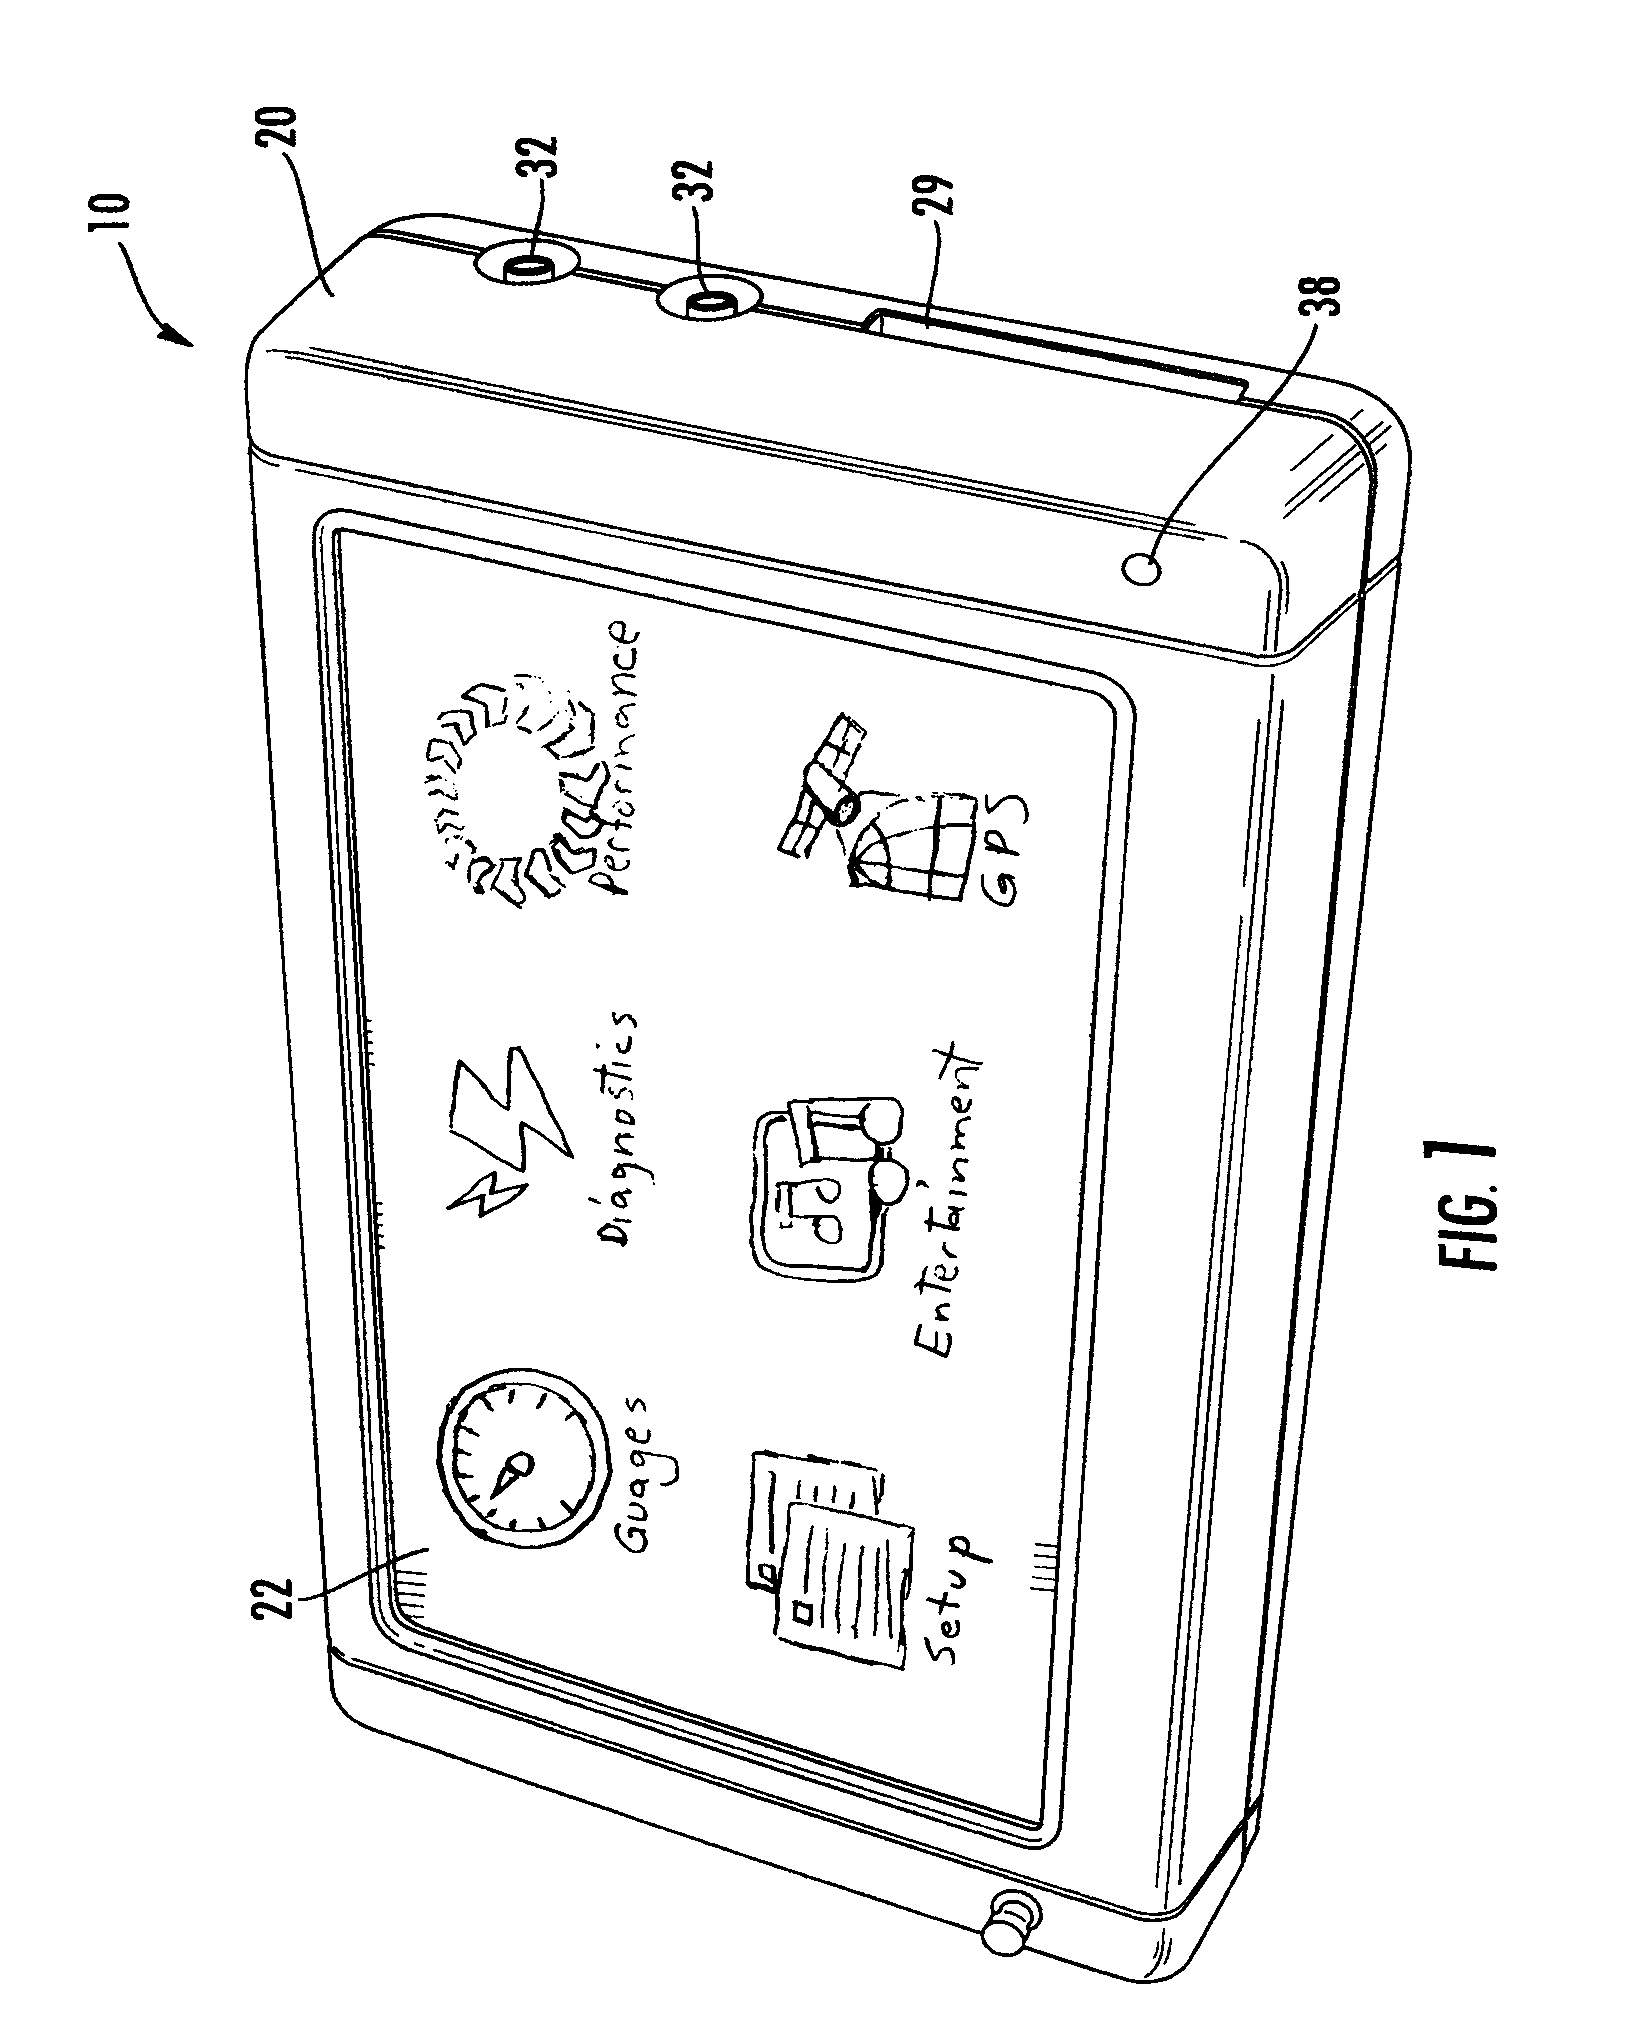 Data acquisition and display system for motor vehicles